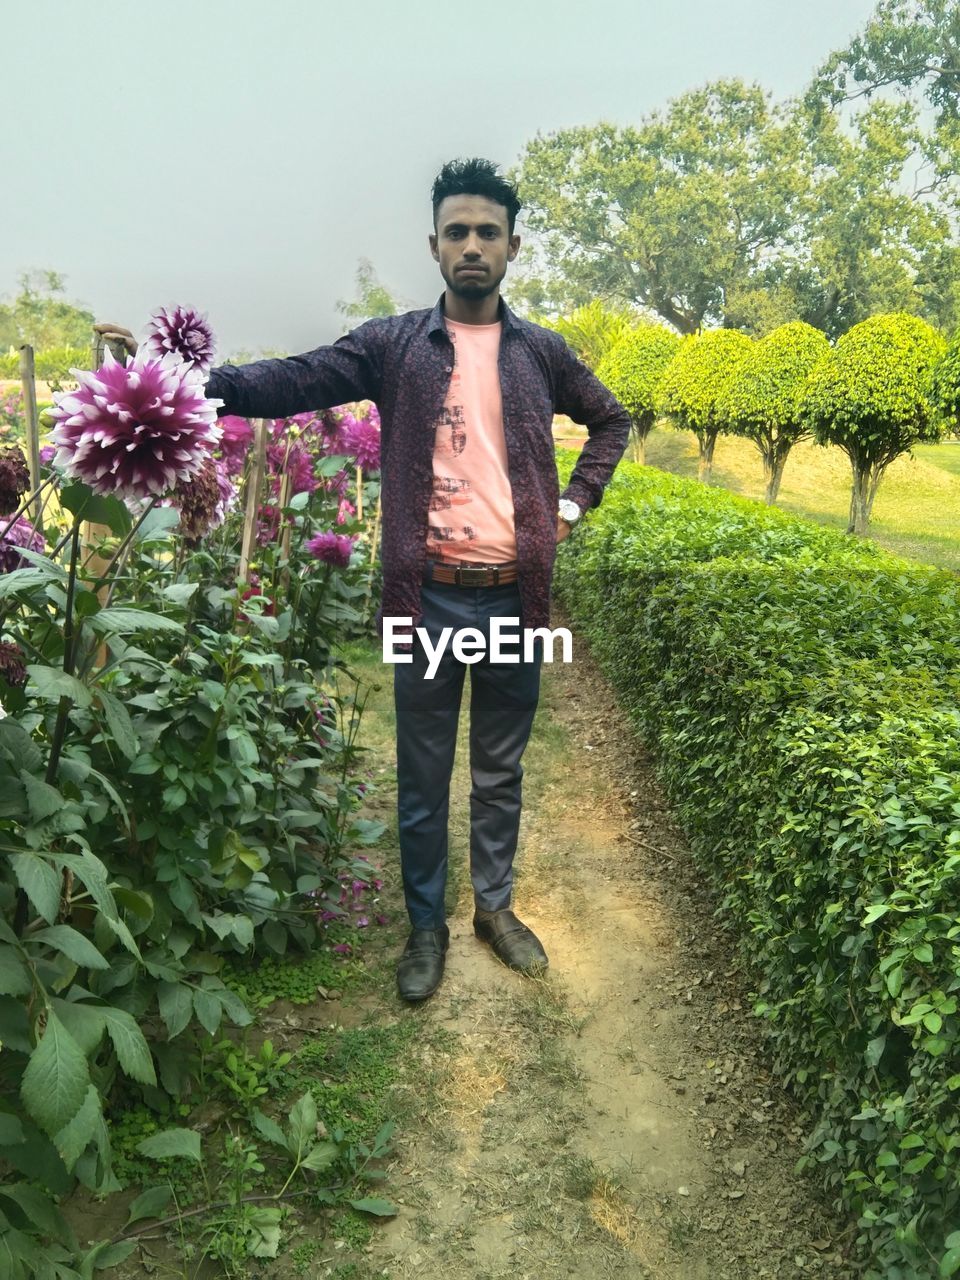 plant, one person, agriculture, growth, nature, front view, full length, flower, adult, standing, casual clothing, flowering plant, looking at camera, portrait, day, lifestyles, men, leisure activity, young adult, beauty in nature, freshness, outdoors, green, sunglasses, farm, glasses, smiling, field, sky, shrub, rural scene, crop, landscape, clothing, fashion, happiness, garden, plantation, land, gardening